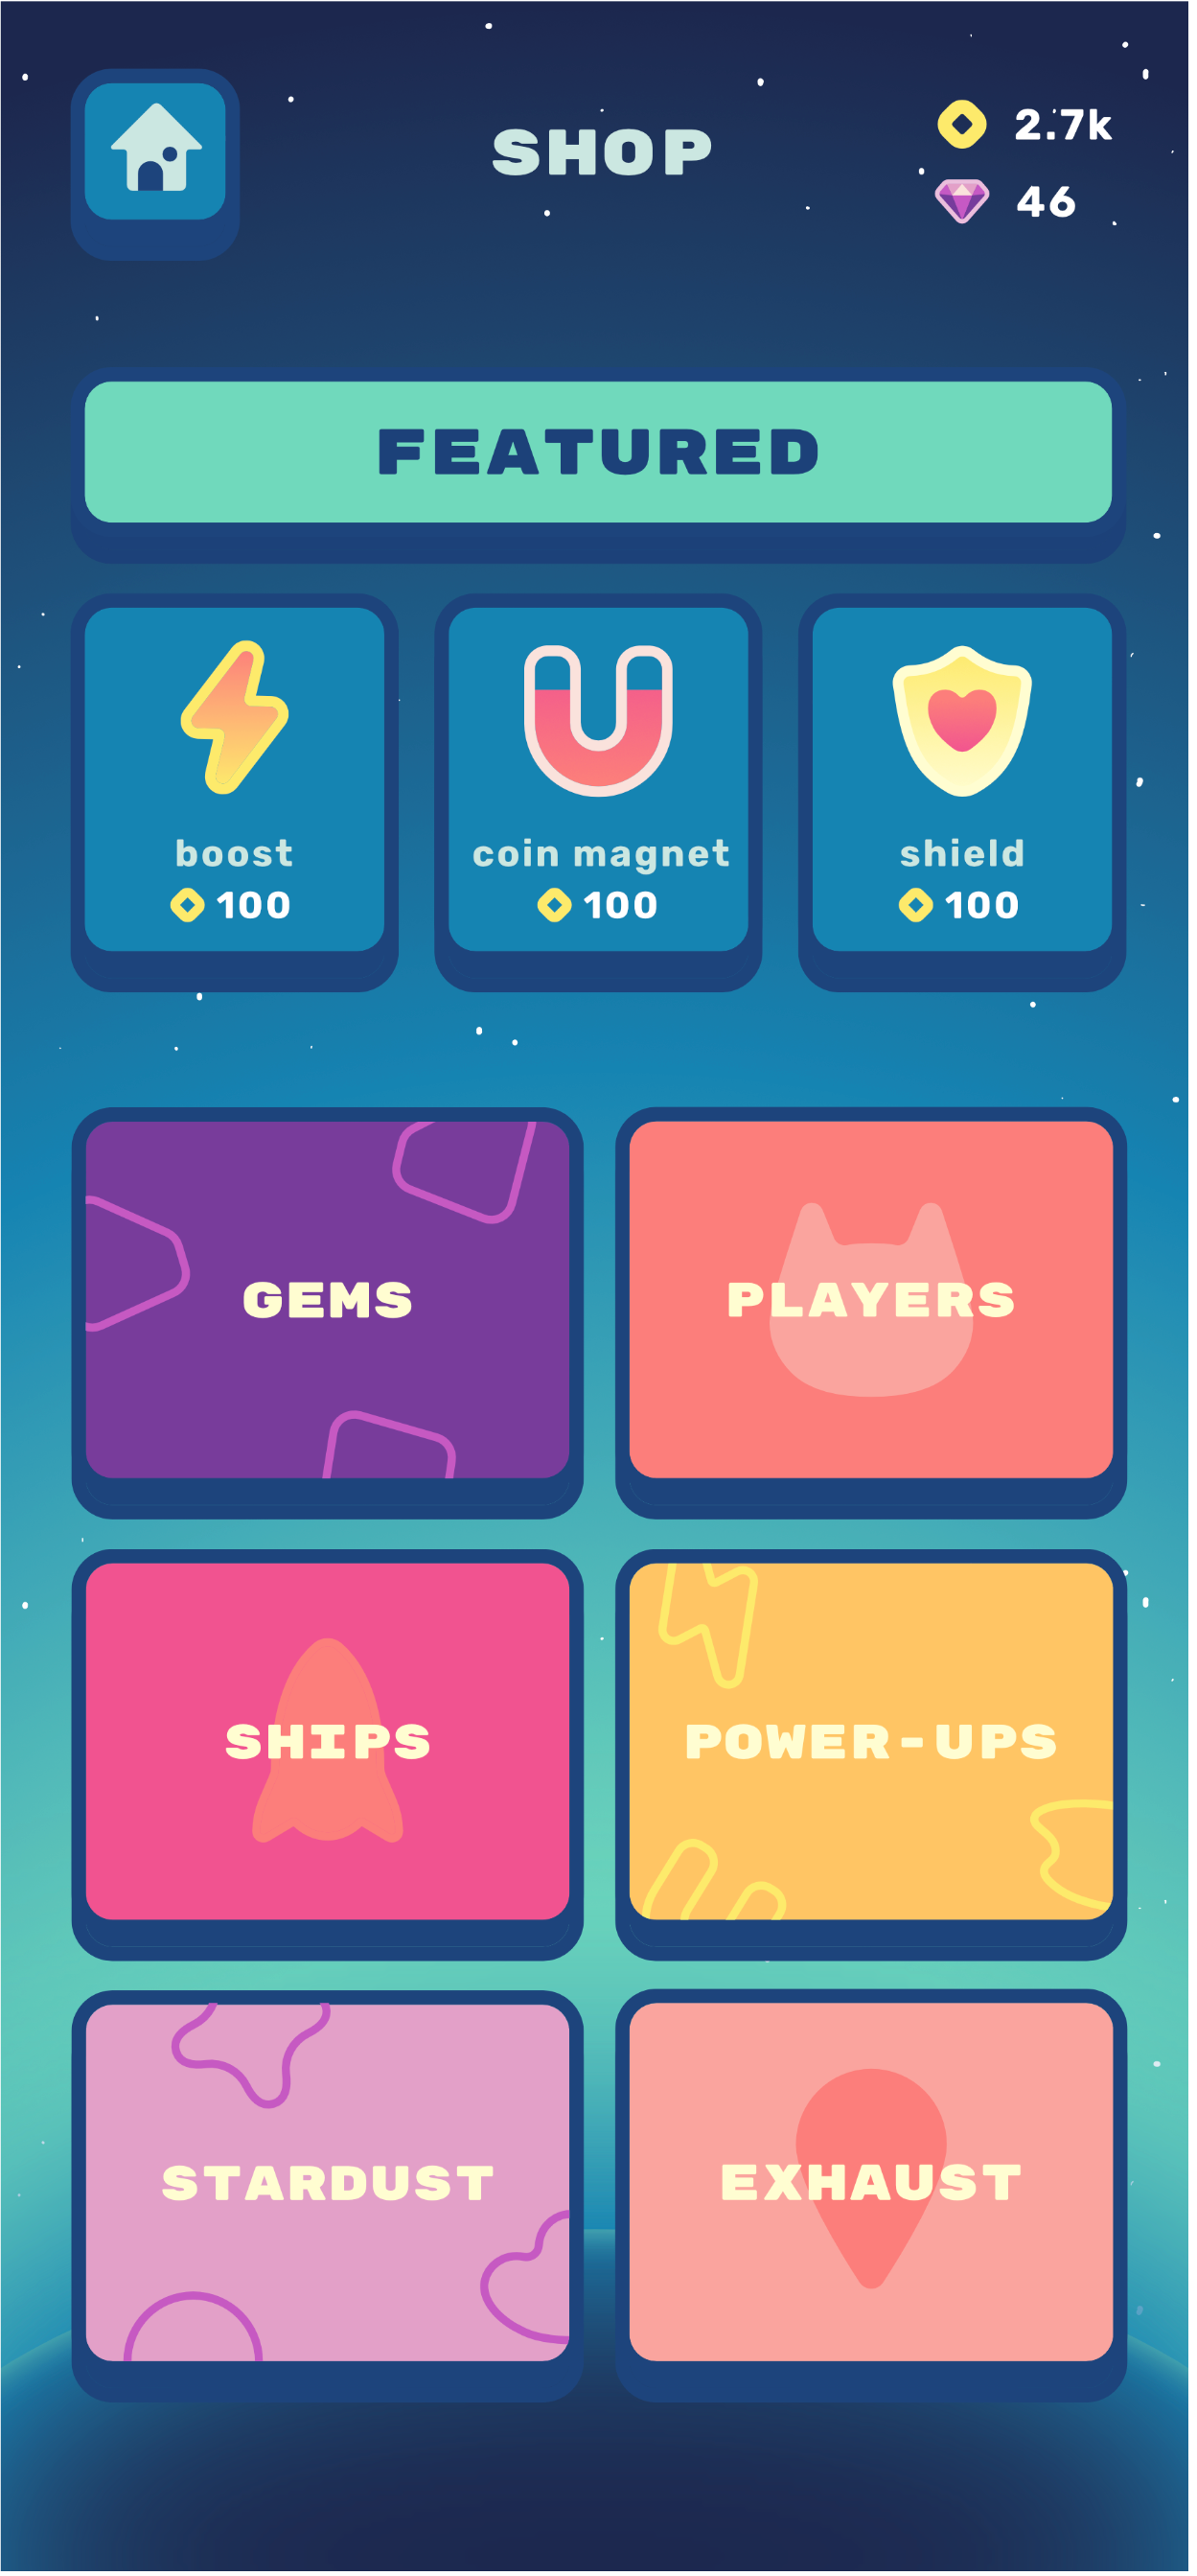 item shop landing screen showing featured items and category selection